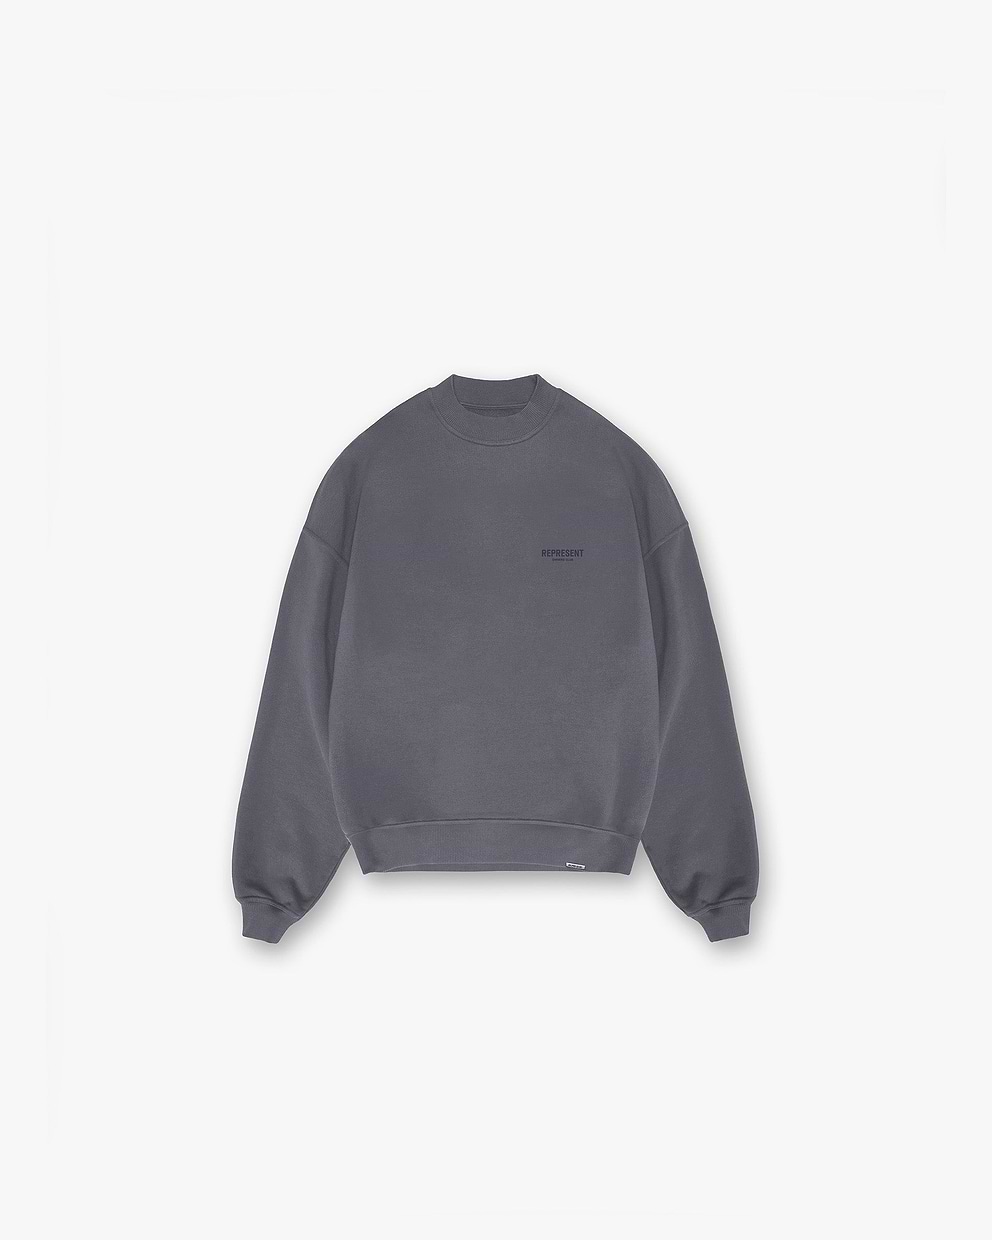 Represent Owners Club Sweater - Storm